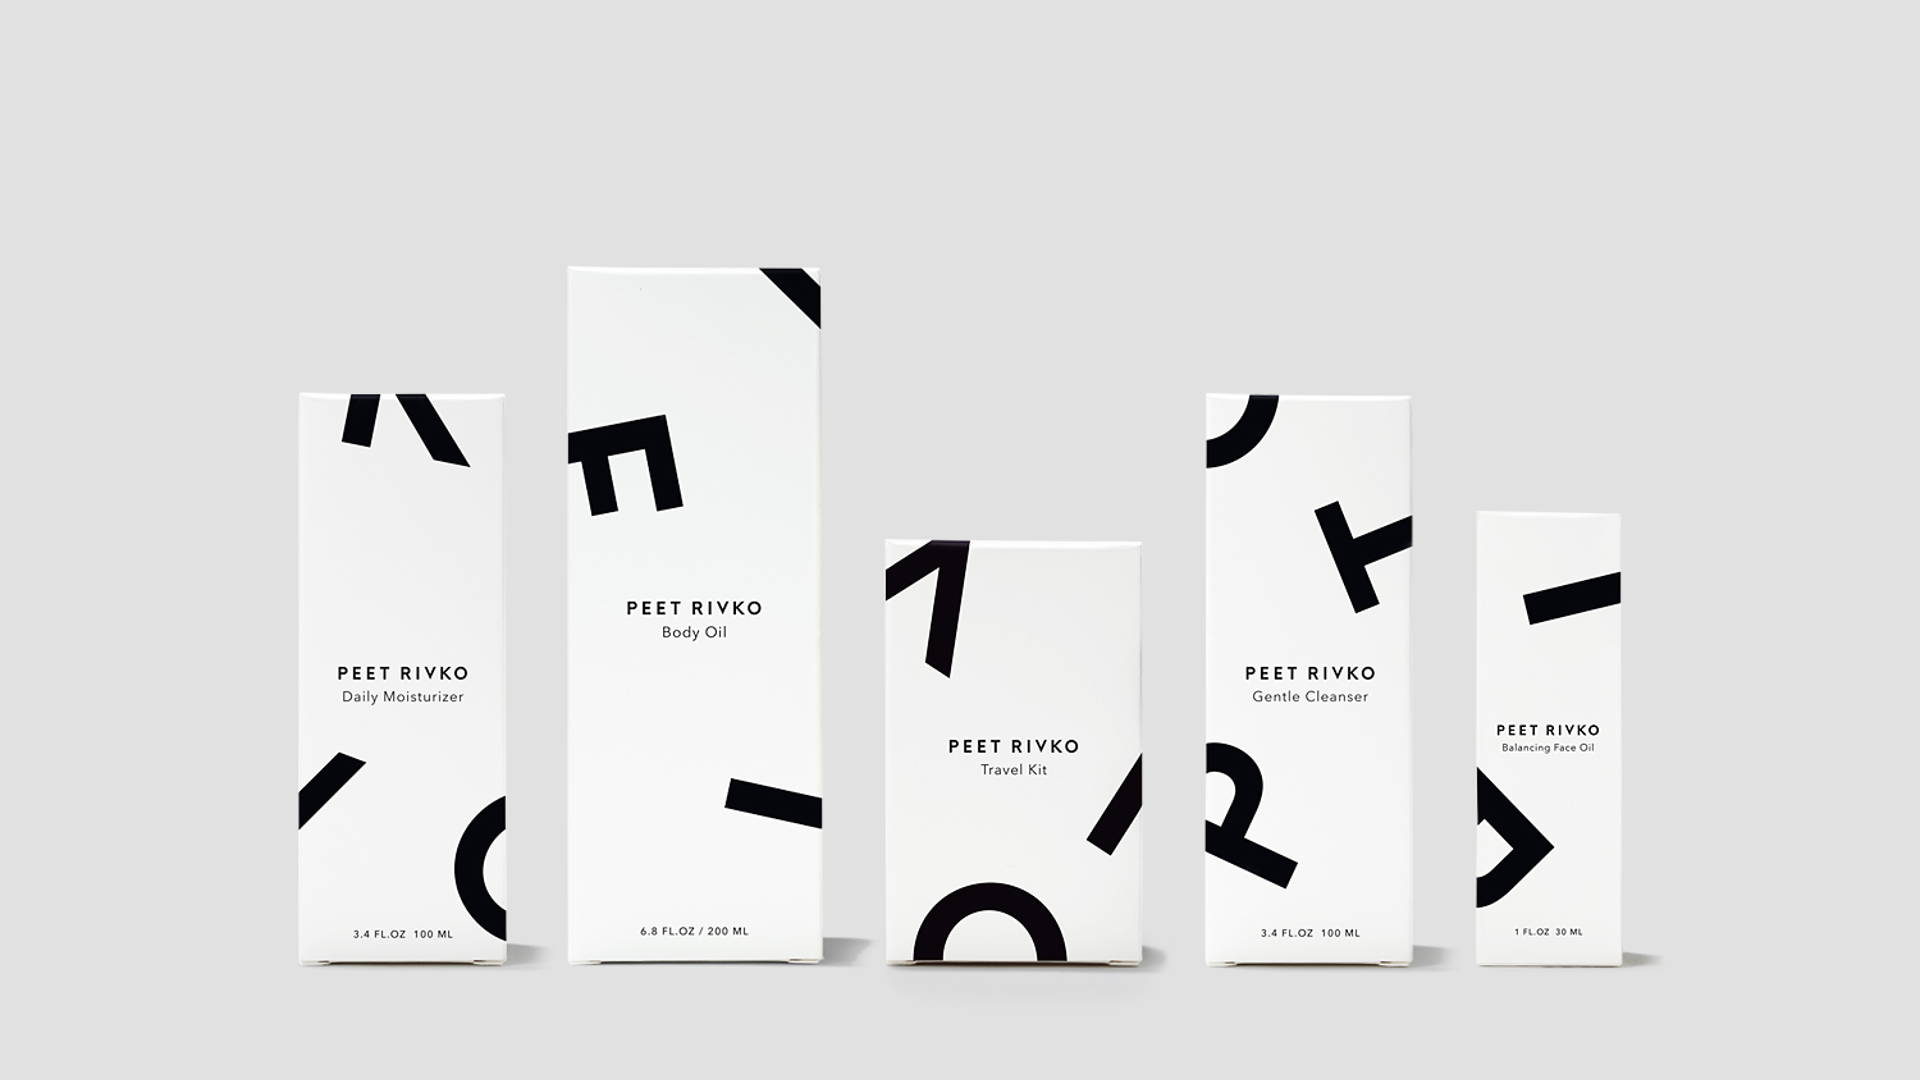 A Fresh Minimalist Design Approach for Plant-Based Skin Care